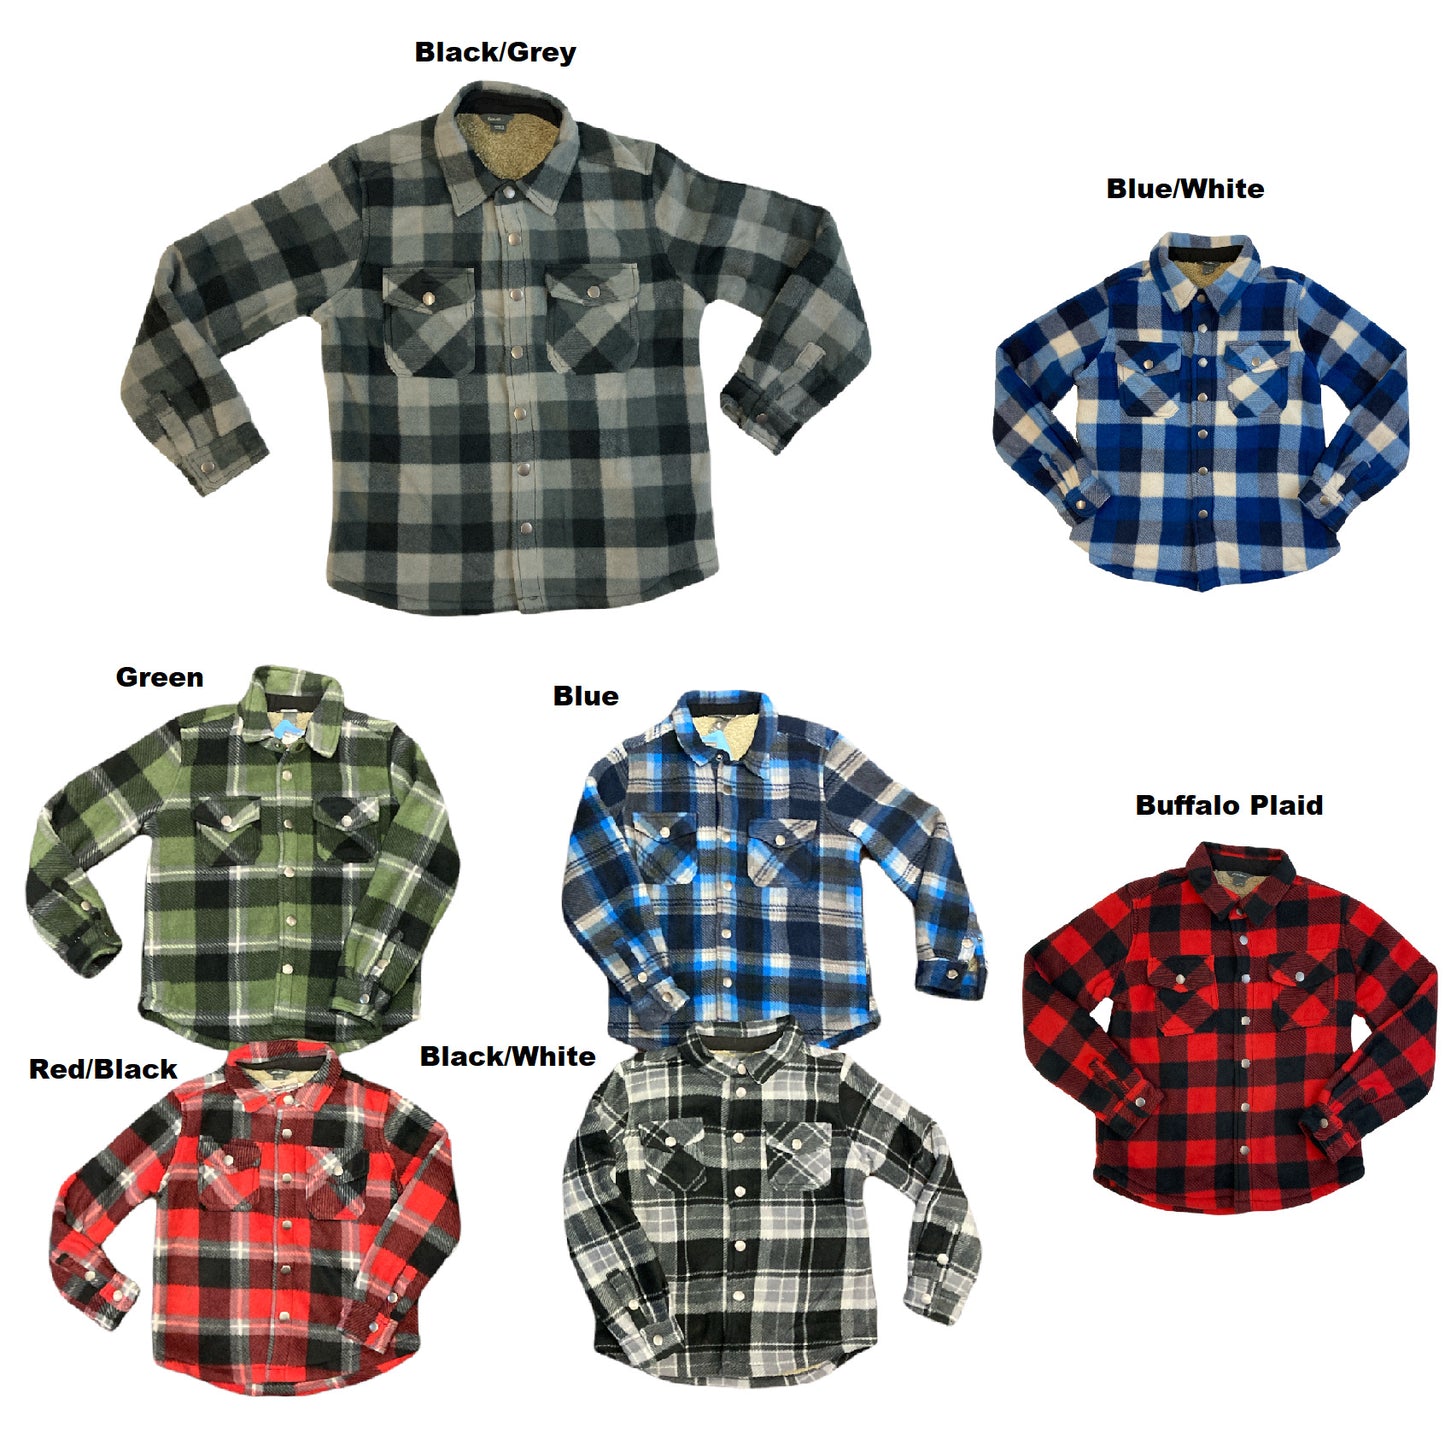 Eddie Bauer Boys' Extra Soft Sherpa Lined Snap Front Plaid Shirt Jacket